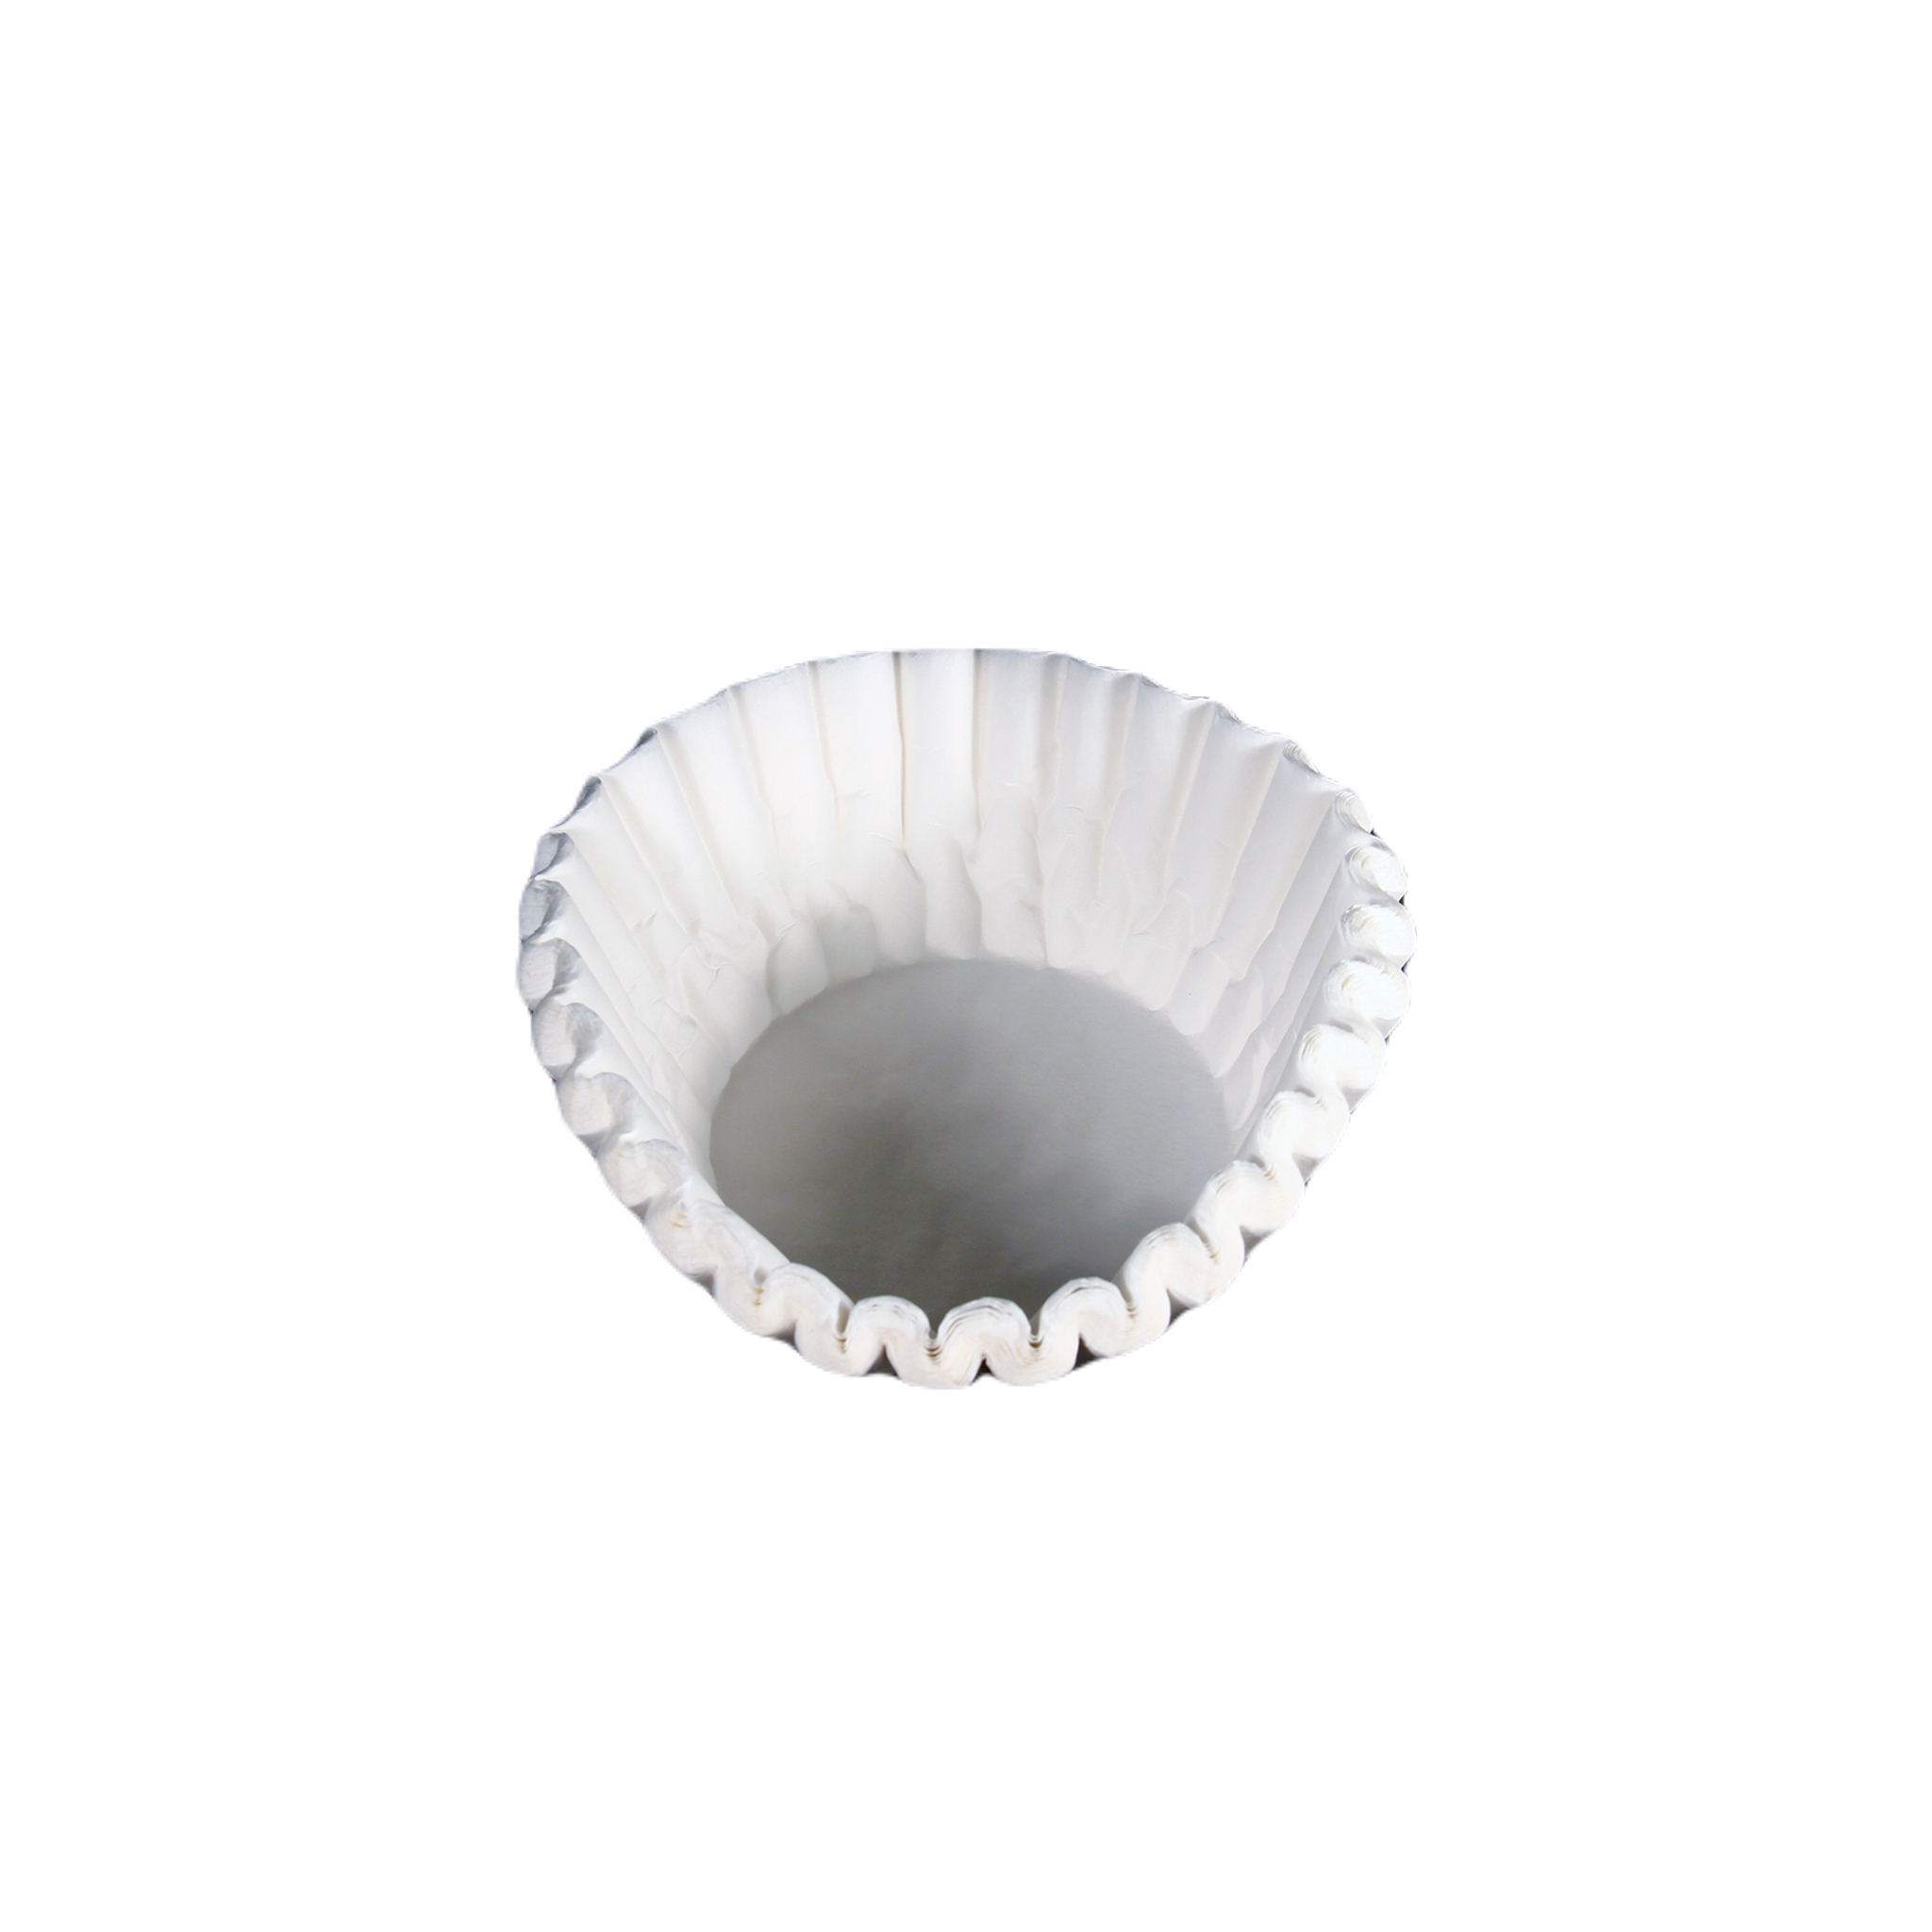 Hotpack | Coffee Filter, Small-10 Cm | 1000Pieces - Hotpack Bahrain